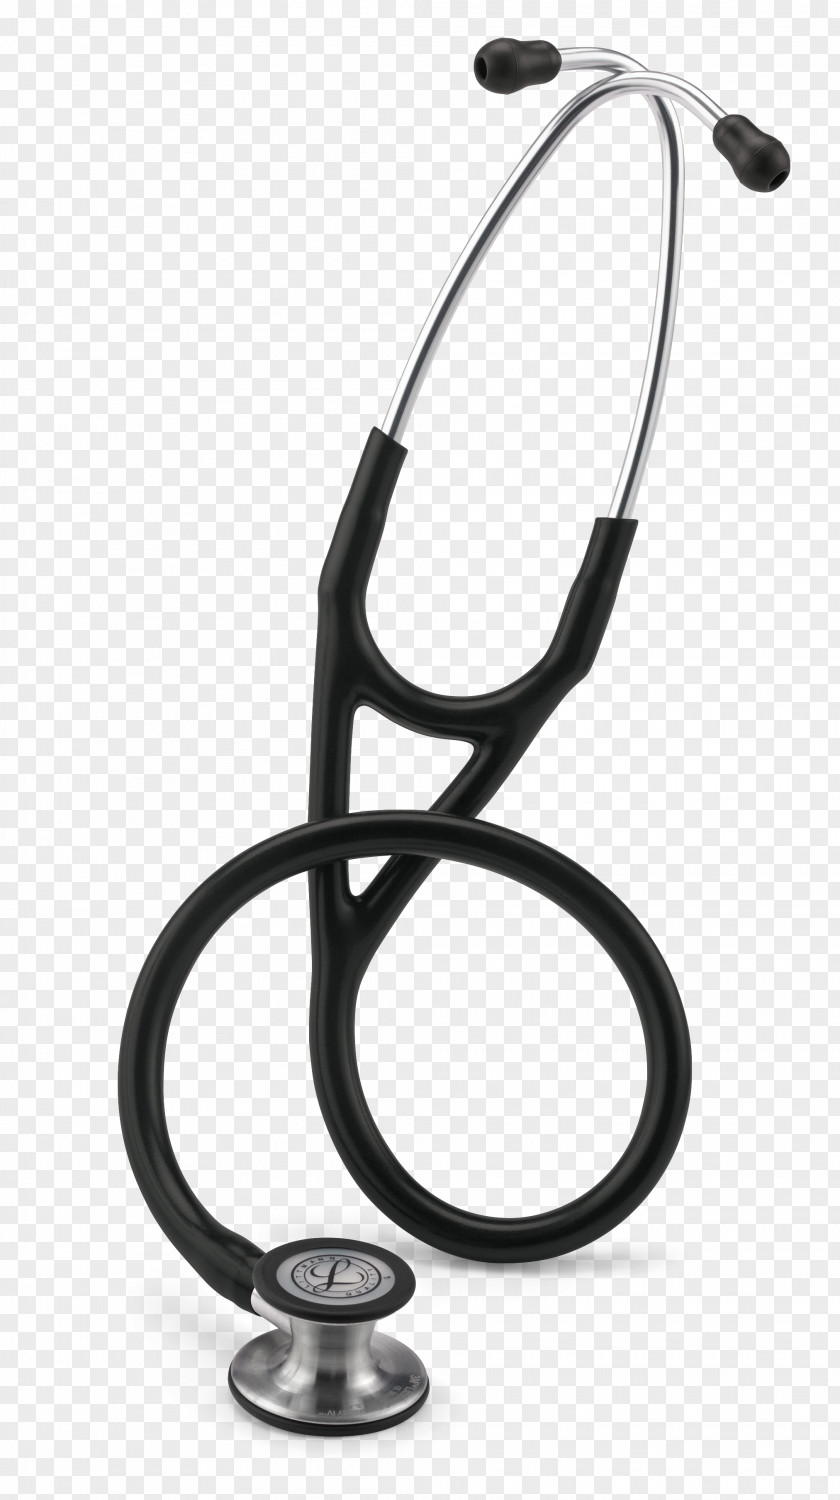 3M Stethoscope Cardiology Health Care Pediatrics Patient PNG